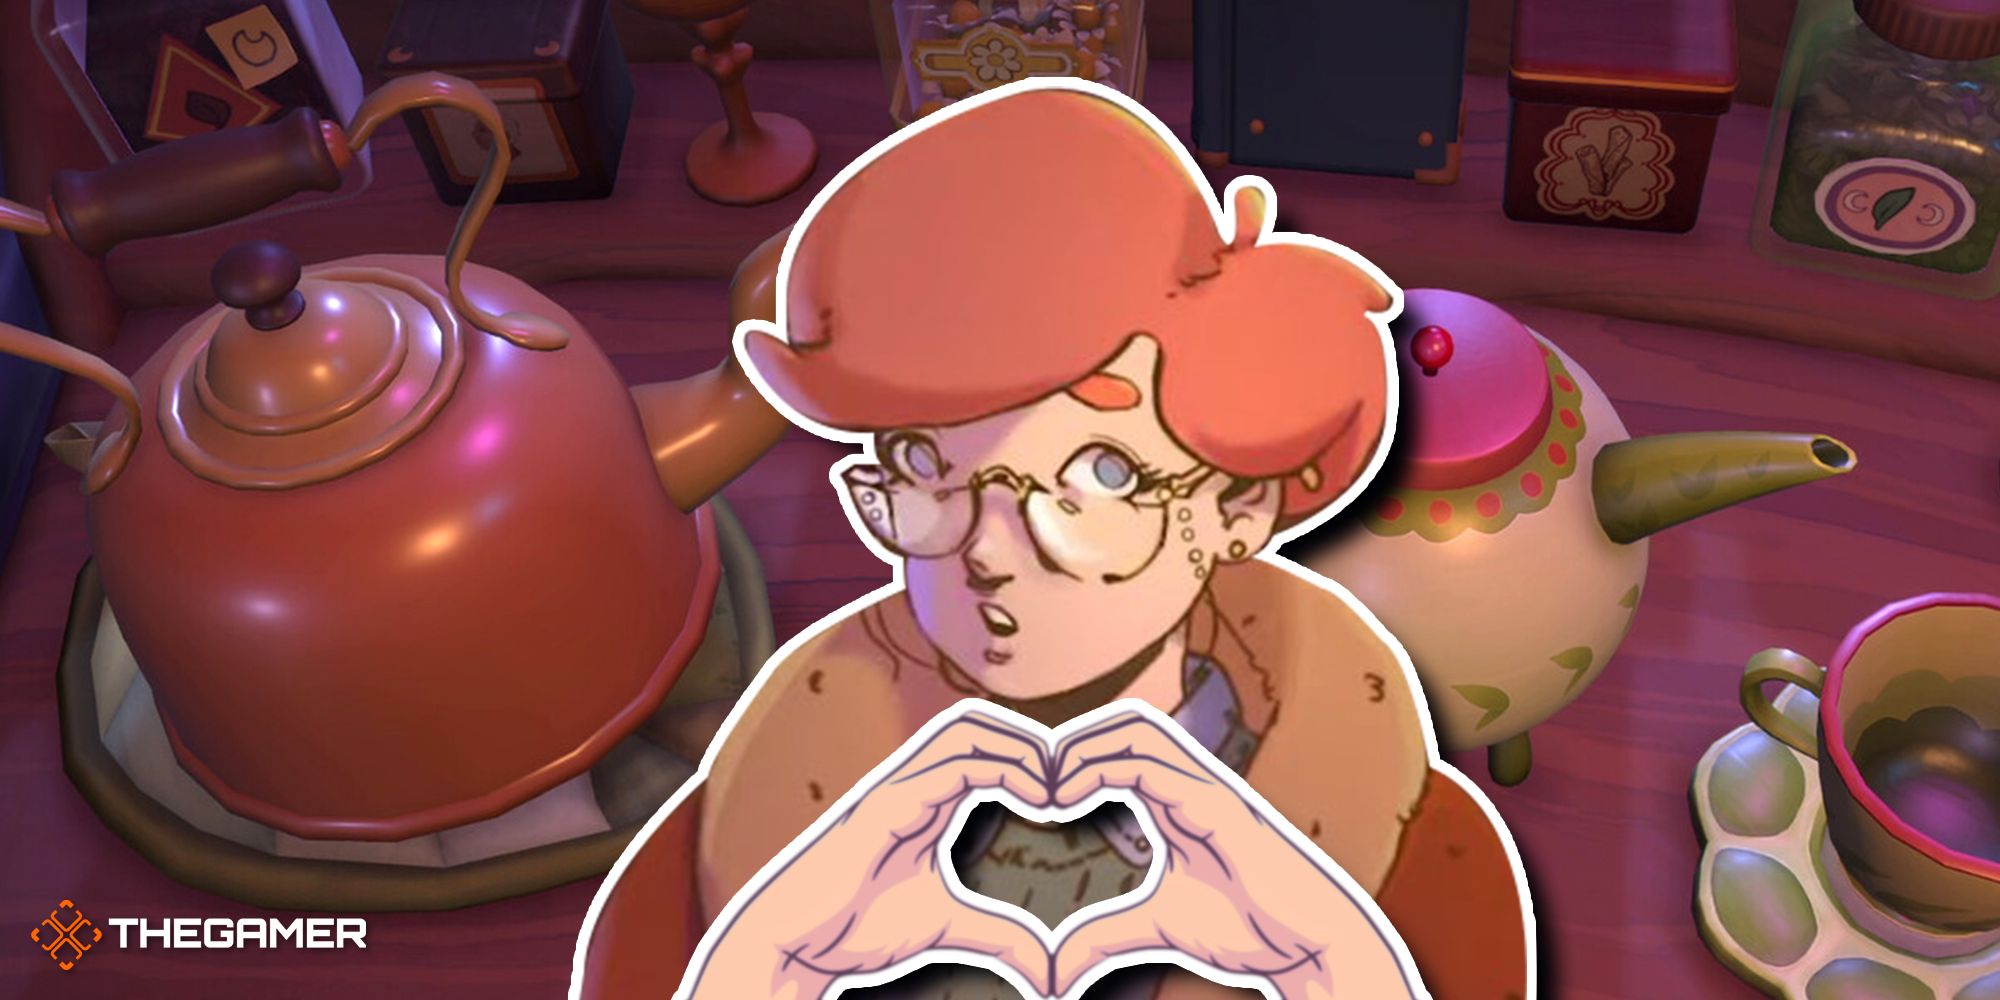 A character in Loose Leaf: A Tea Witch Simulator making a heart with their hands. The tea brewing setup is in the background.